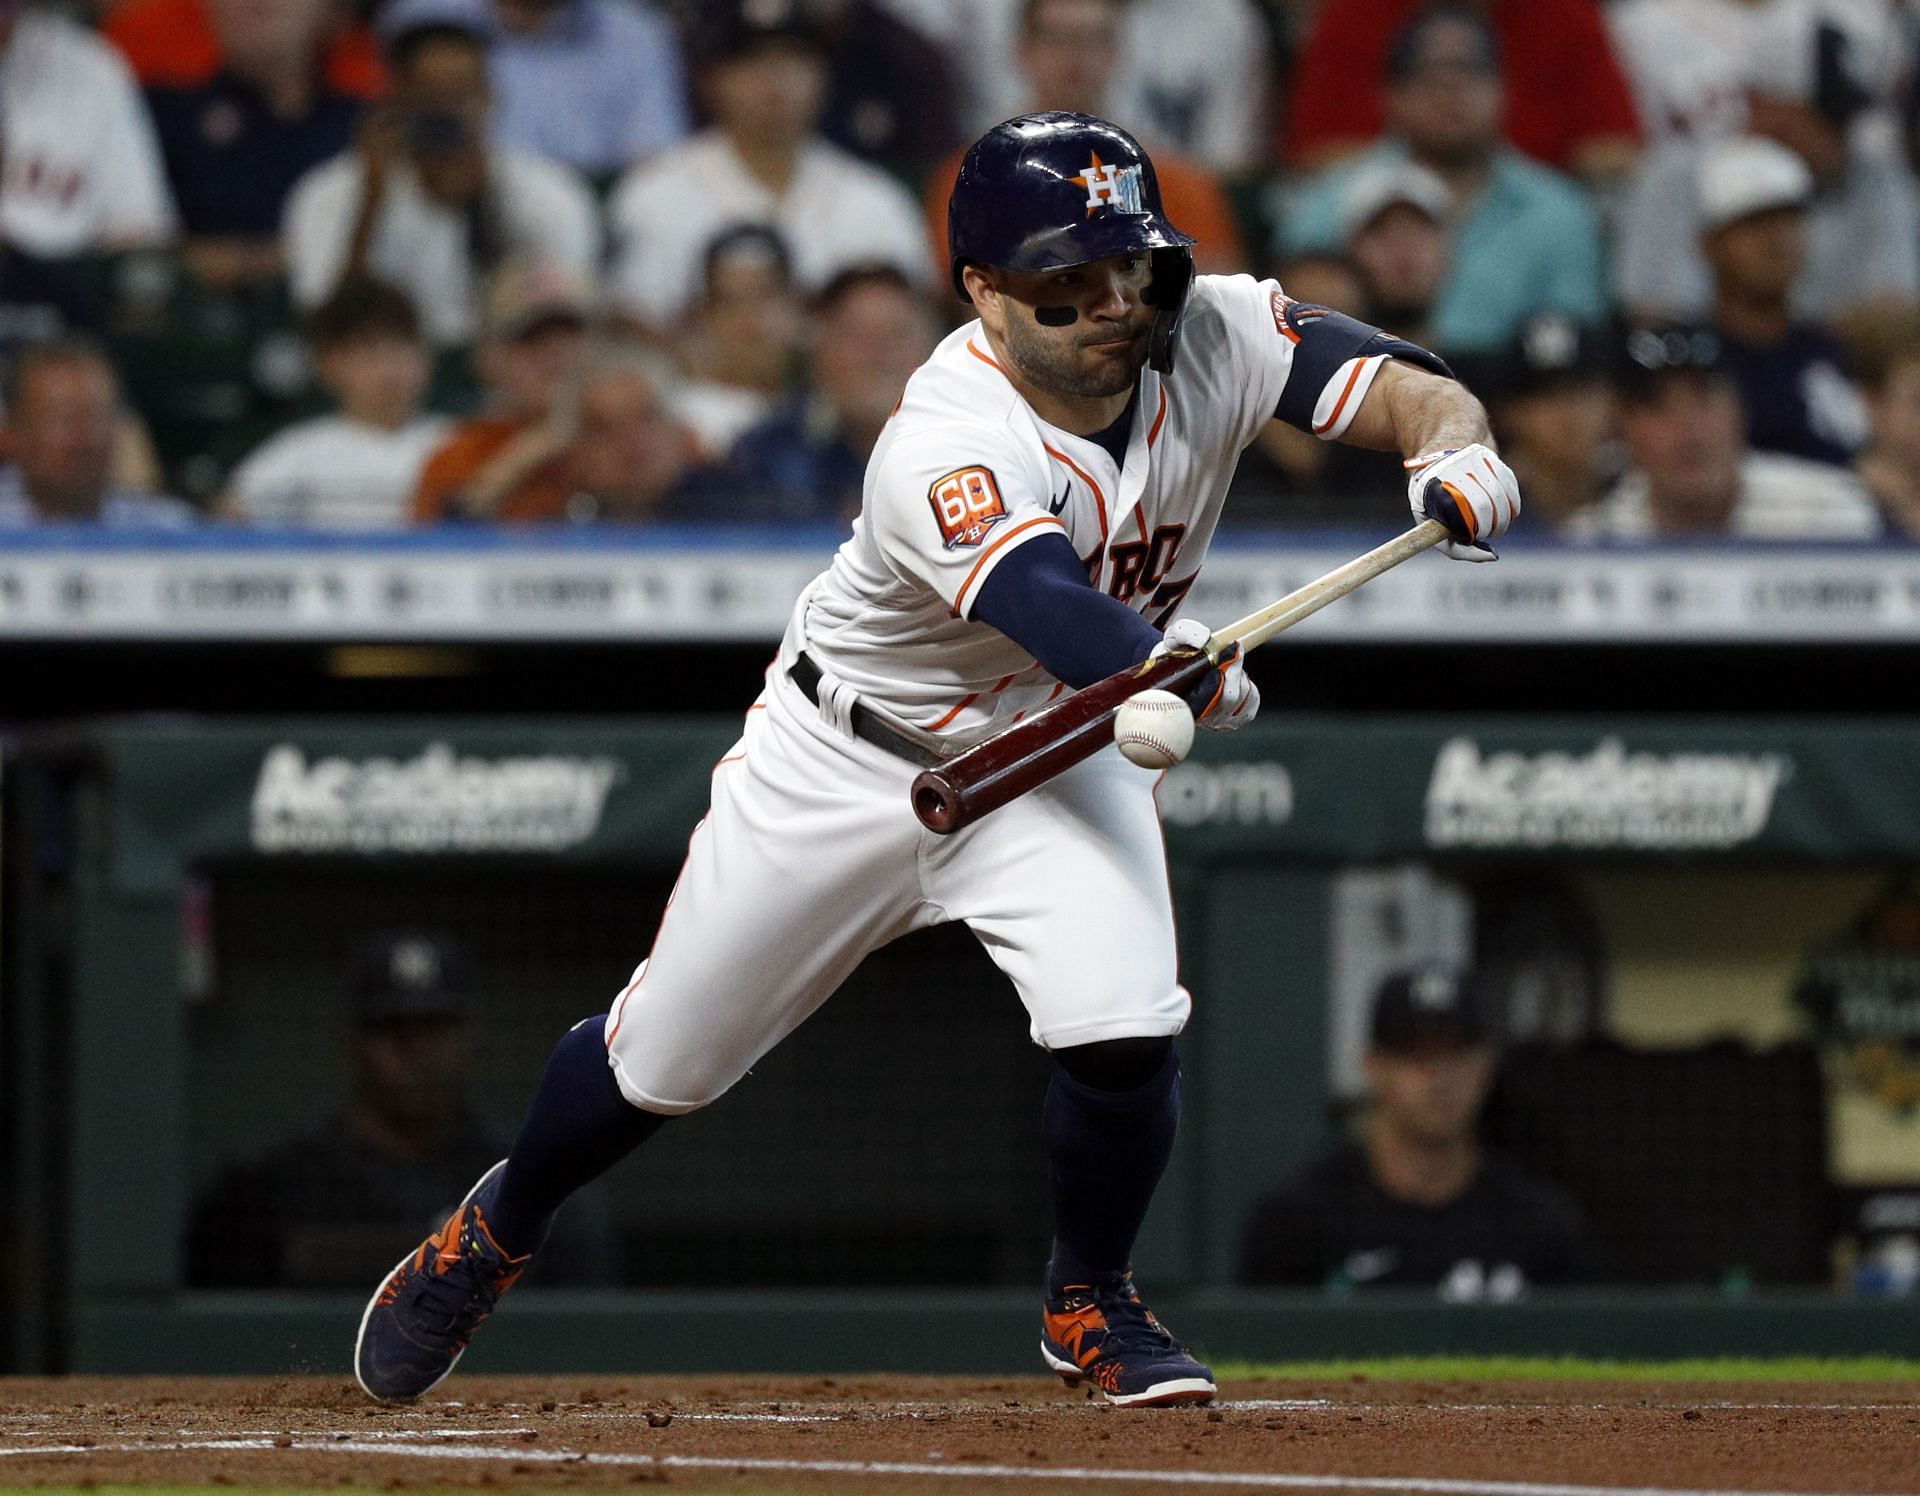 Jose Altuve of the Astros boasts an average of .272.